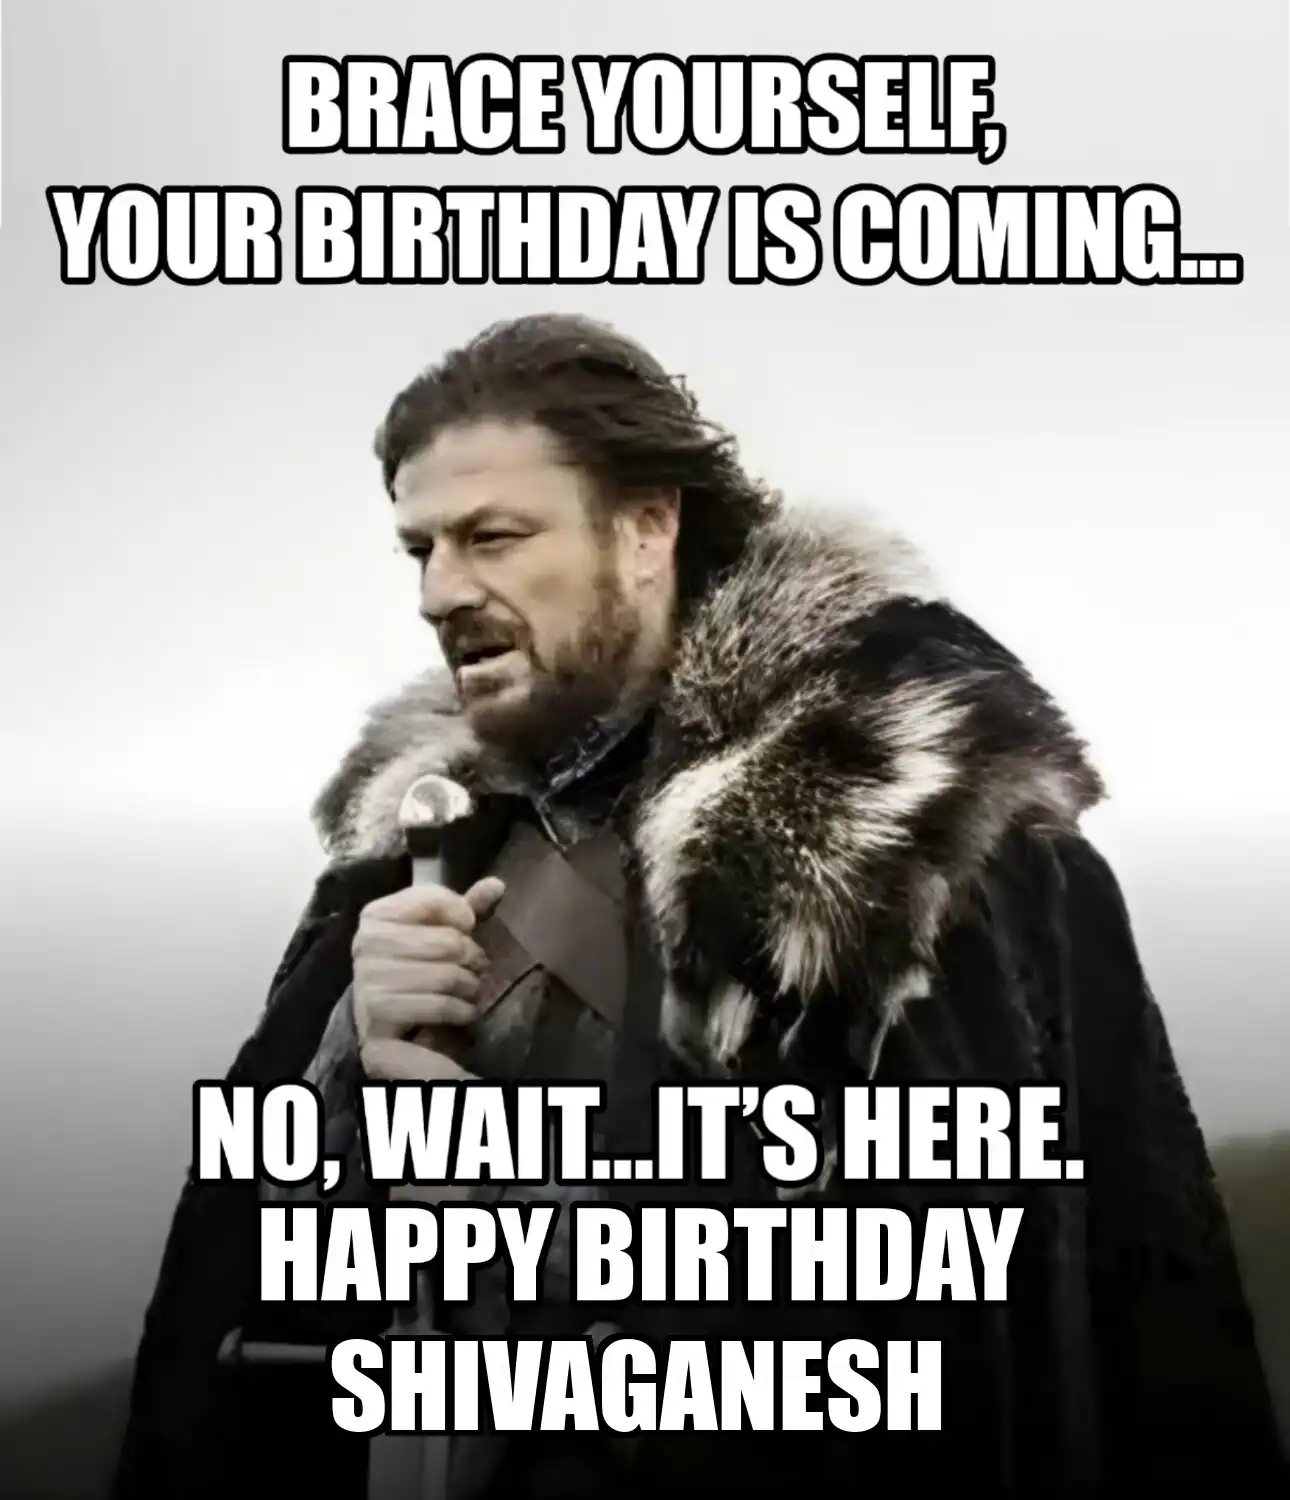 Happy Birthday Shivaganesh Brace Yourself Your Birthday Is Coming Meme